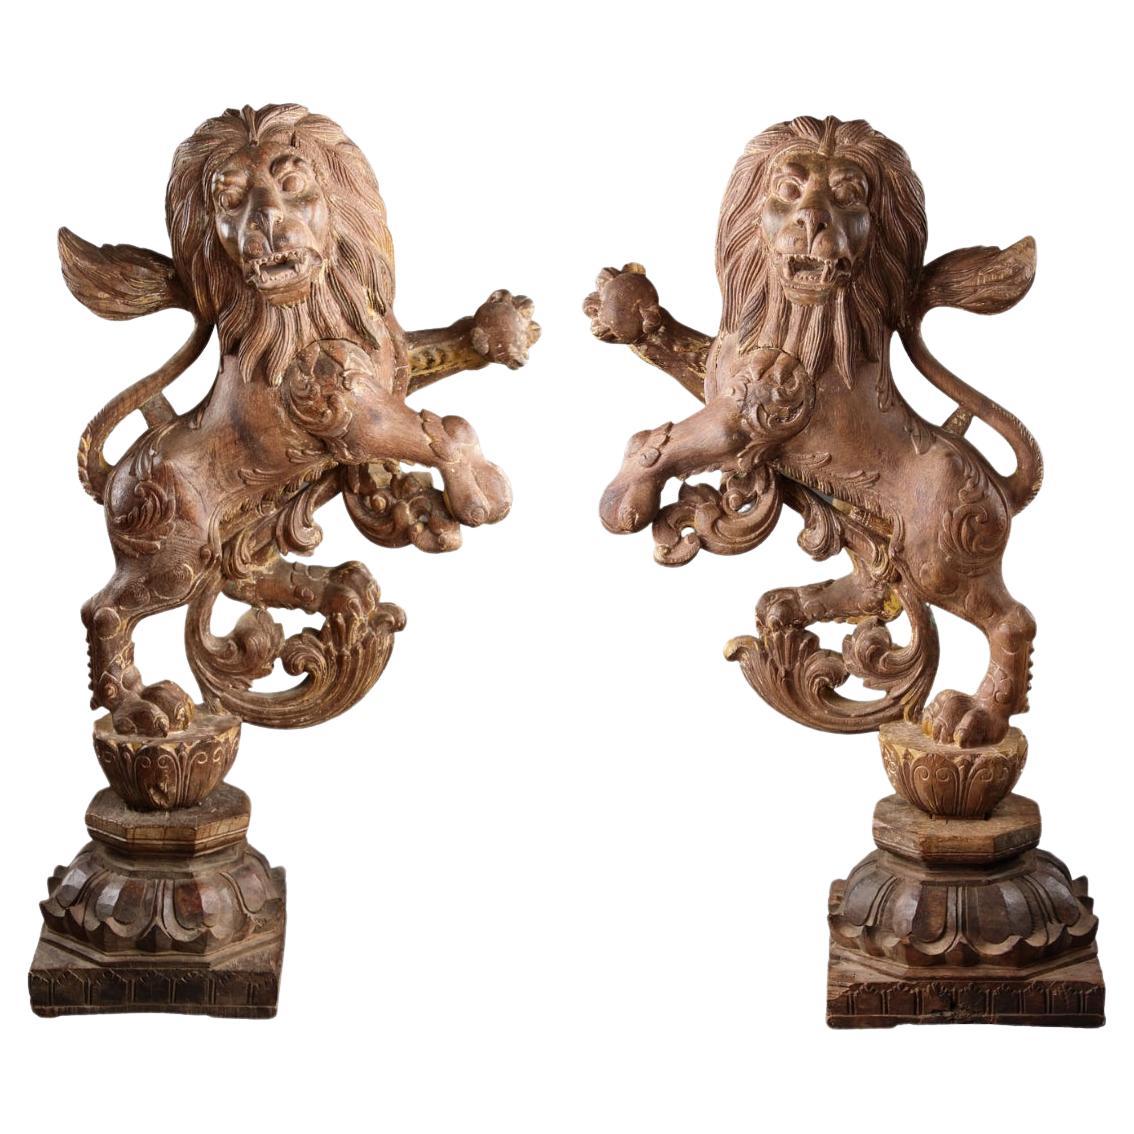 A Fine and Decorative Pair of Rampant Lions For Sale